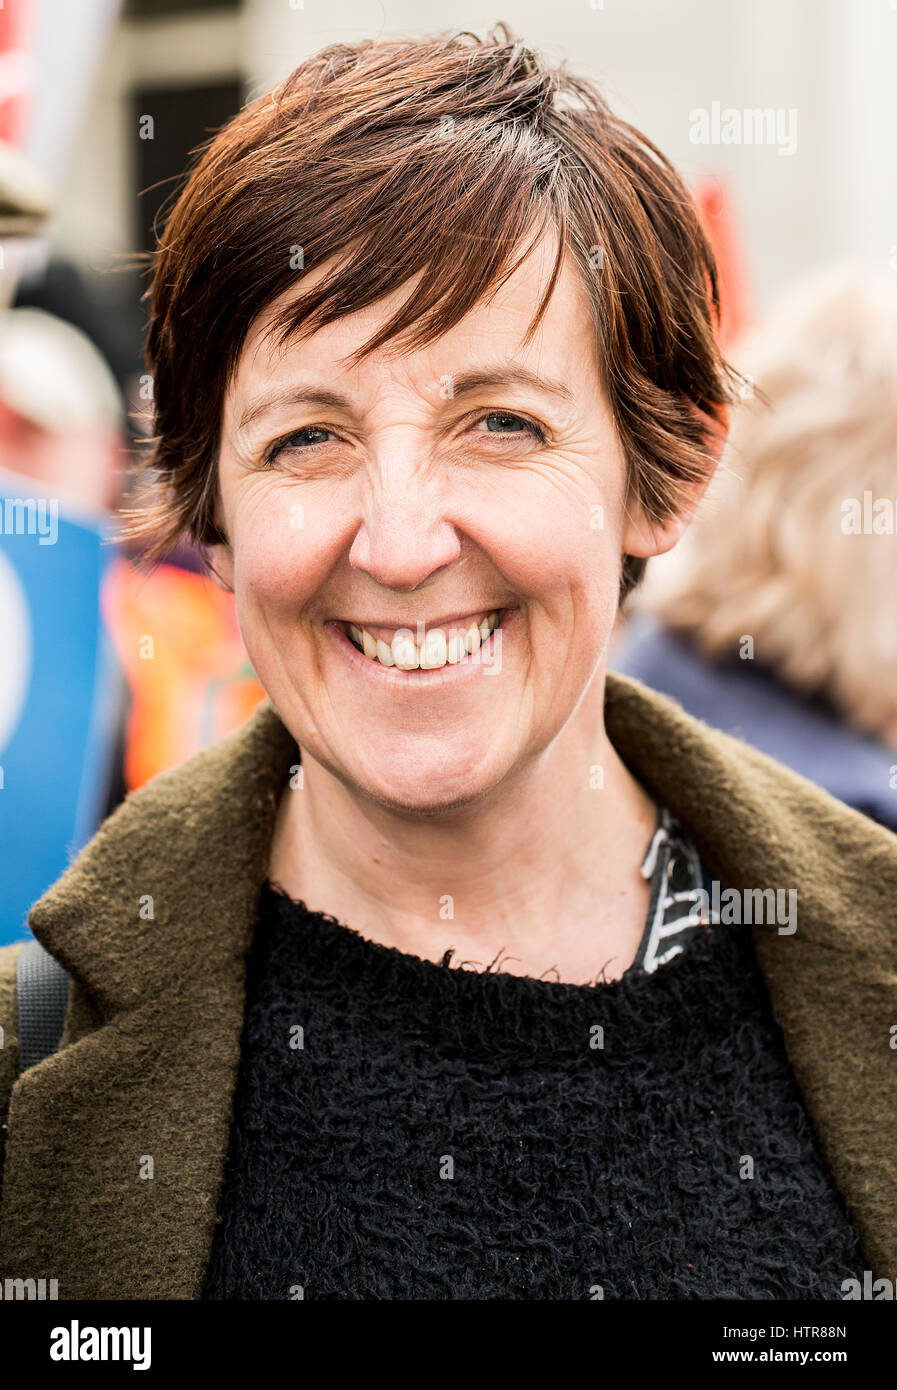 Actress Julie Hesmondhalgh at the # OUR NHS rally - demonstration in London, to defend the NHS against government cuts, closures and privatisation. Stock Photo